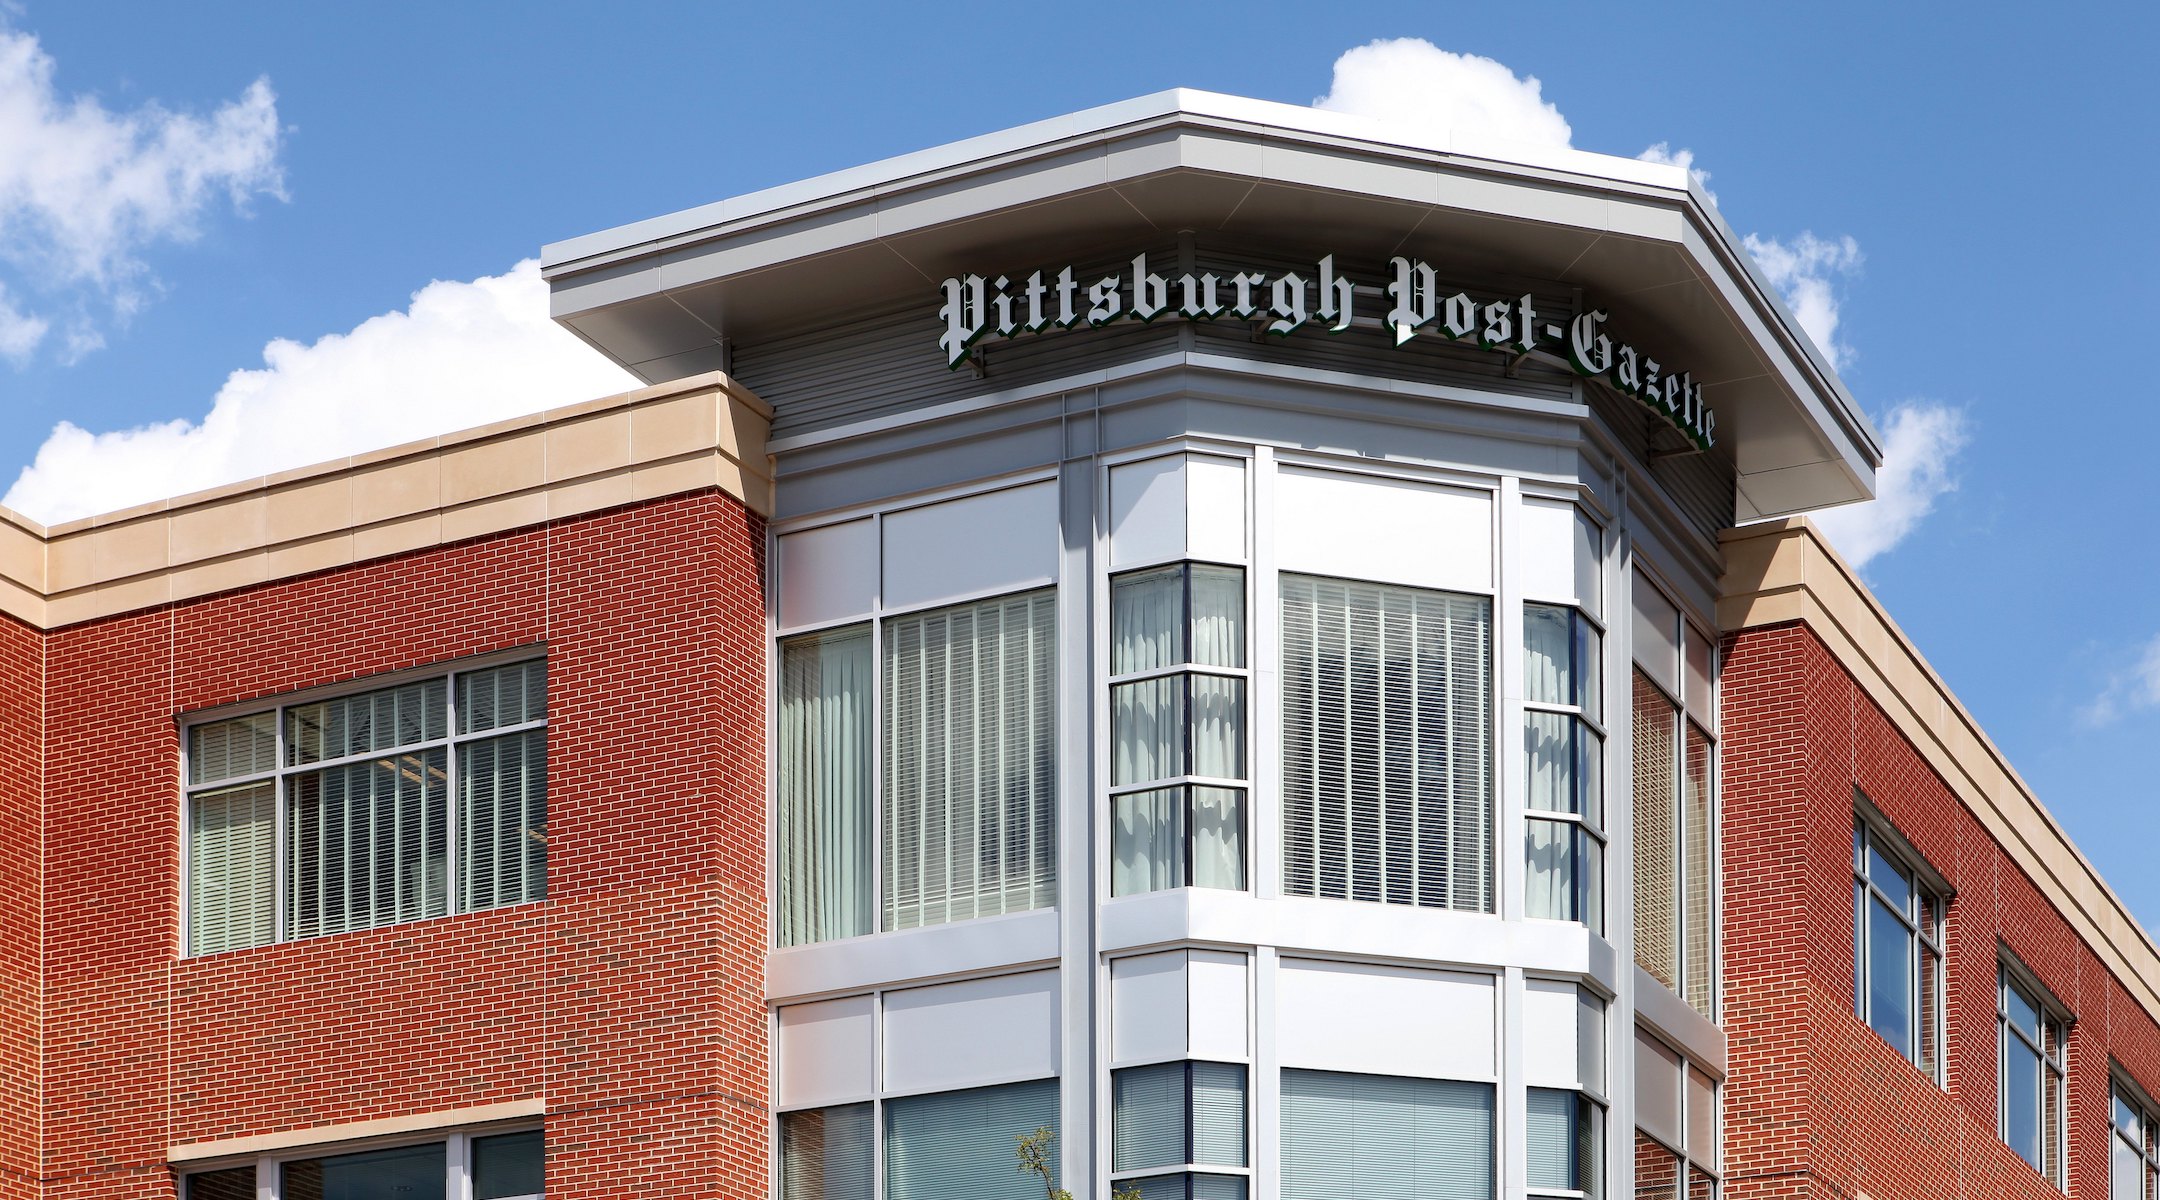 A view of the Pittsburgh Post-Gazette building in Pittsburgh, Aug. 26, 2016. (Raymond Boyd/Getty Images)